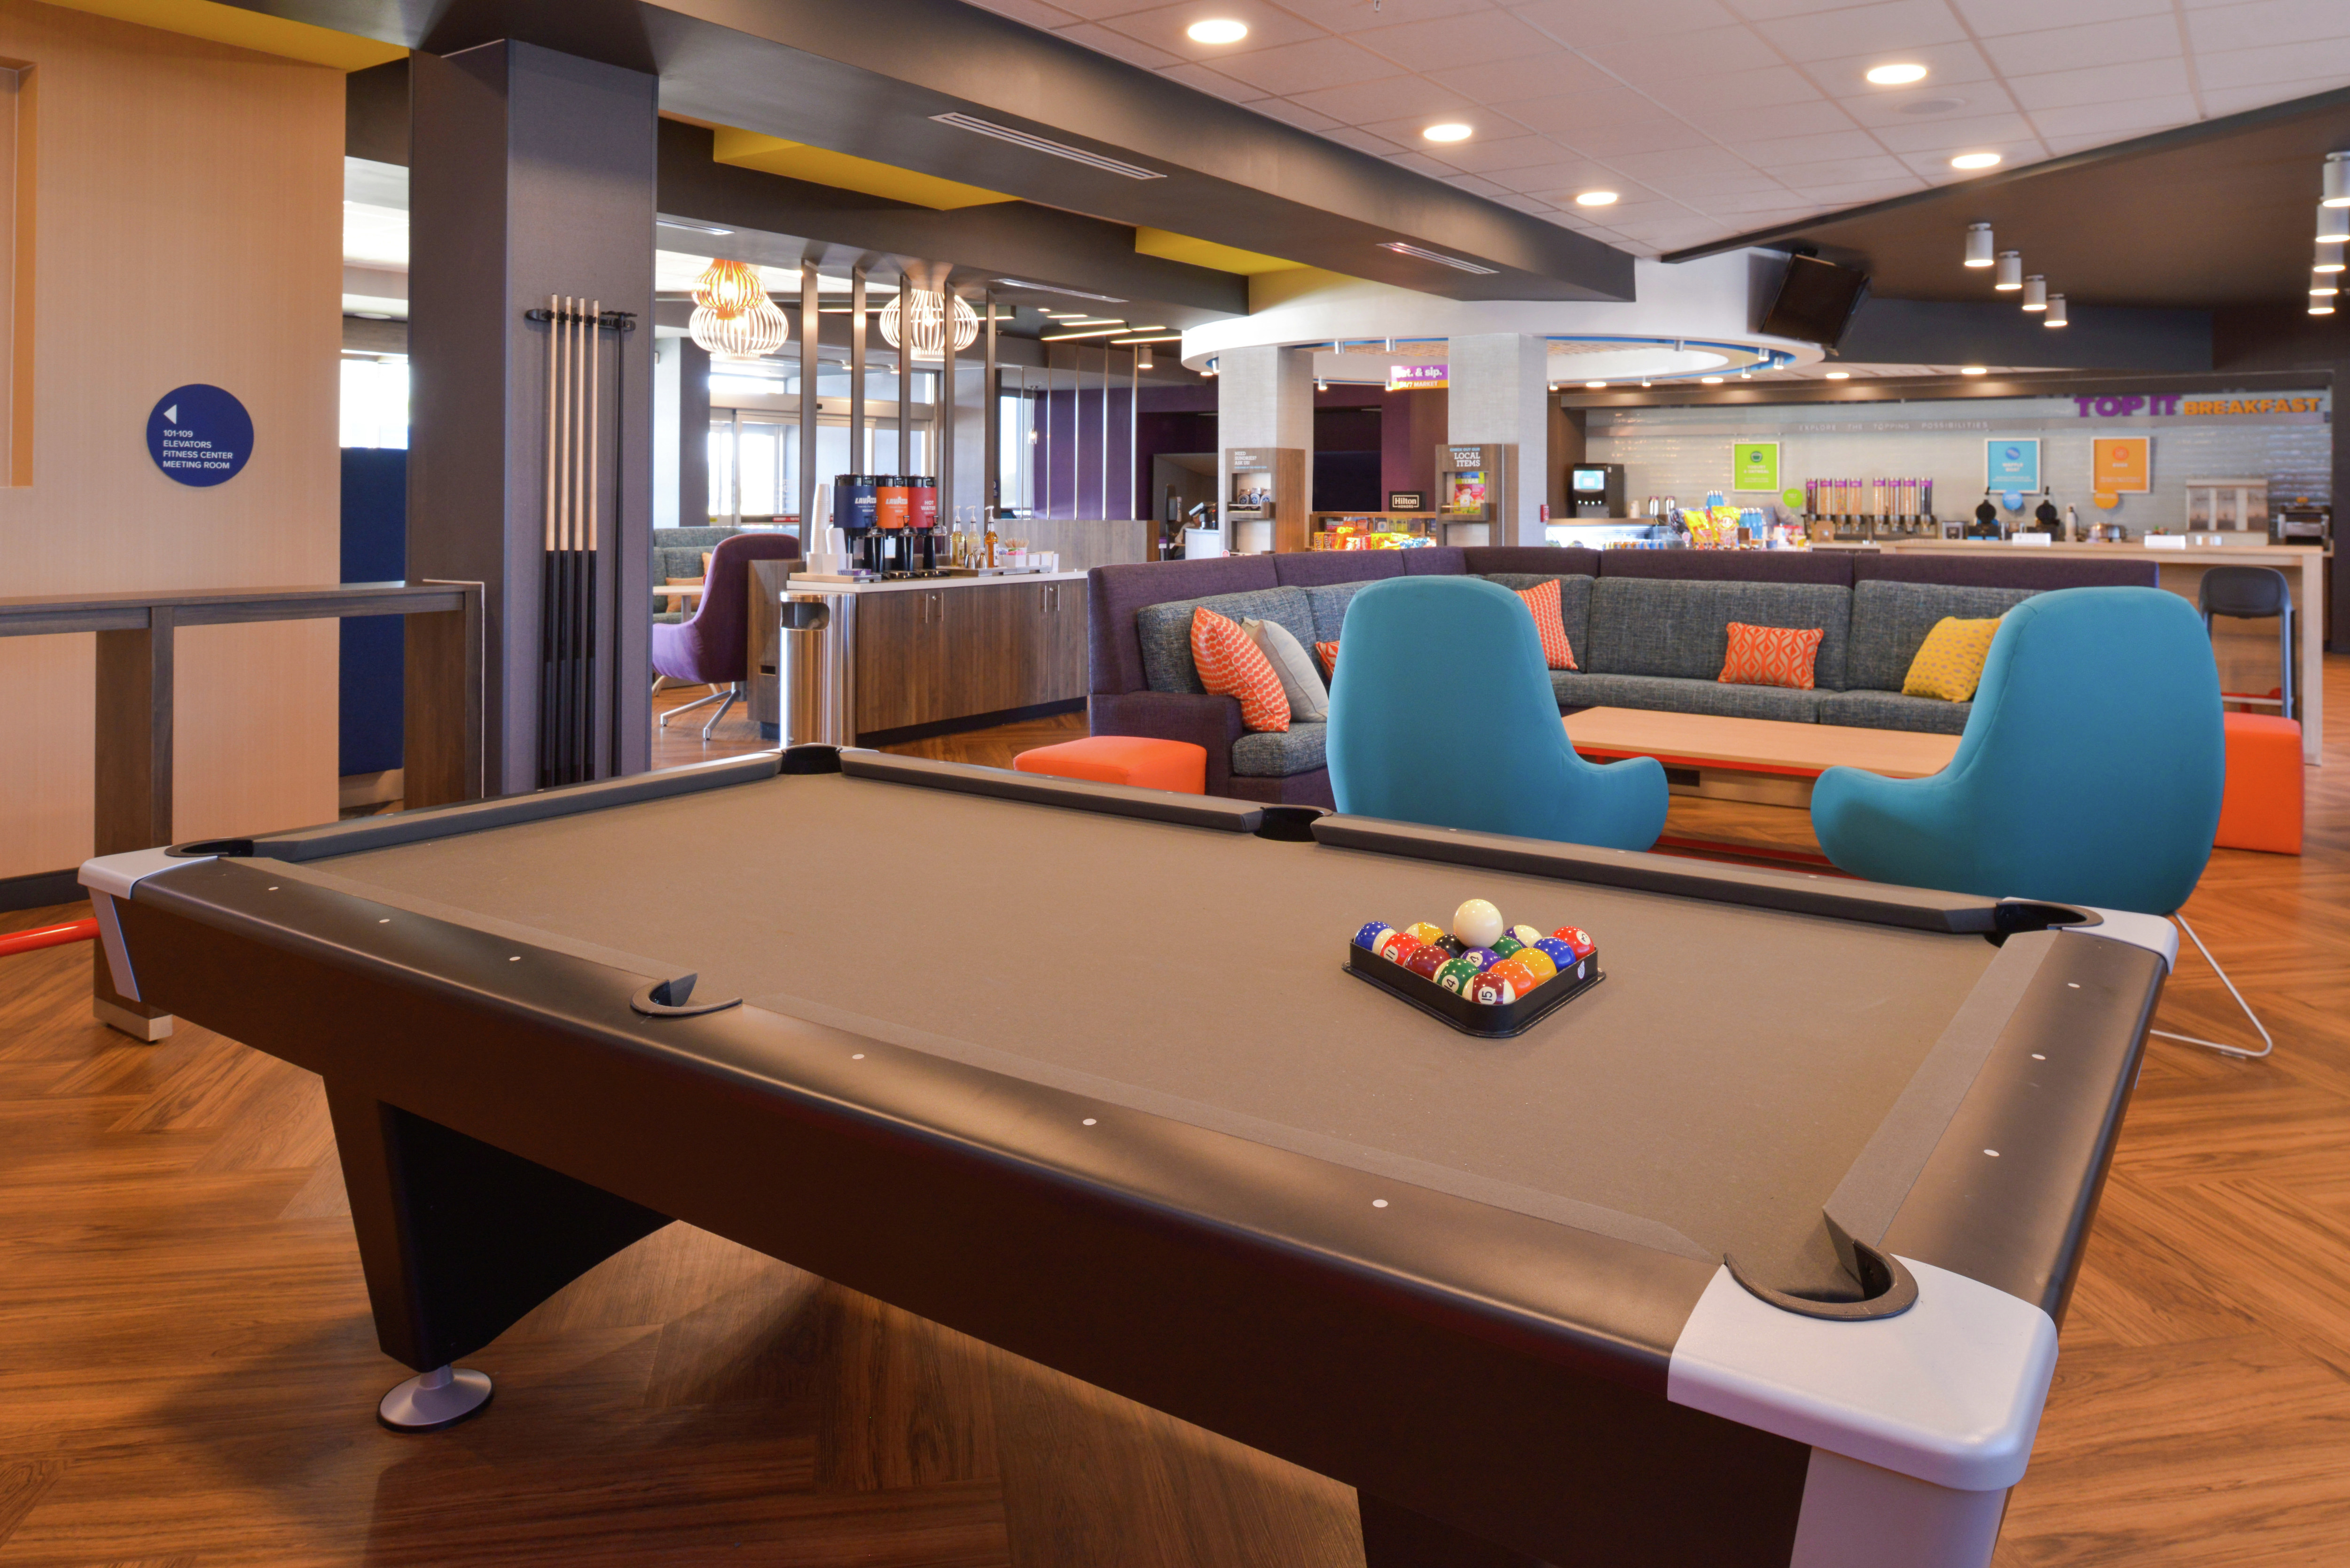 Lobby Area With Pool Table